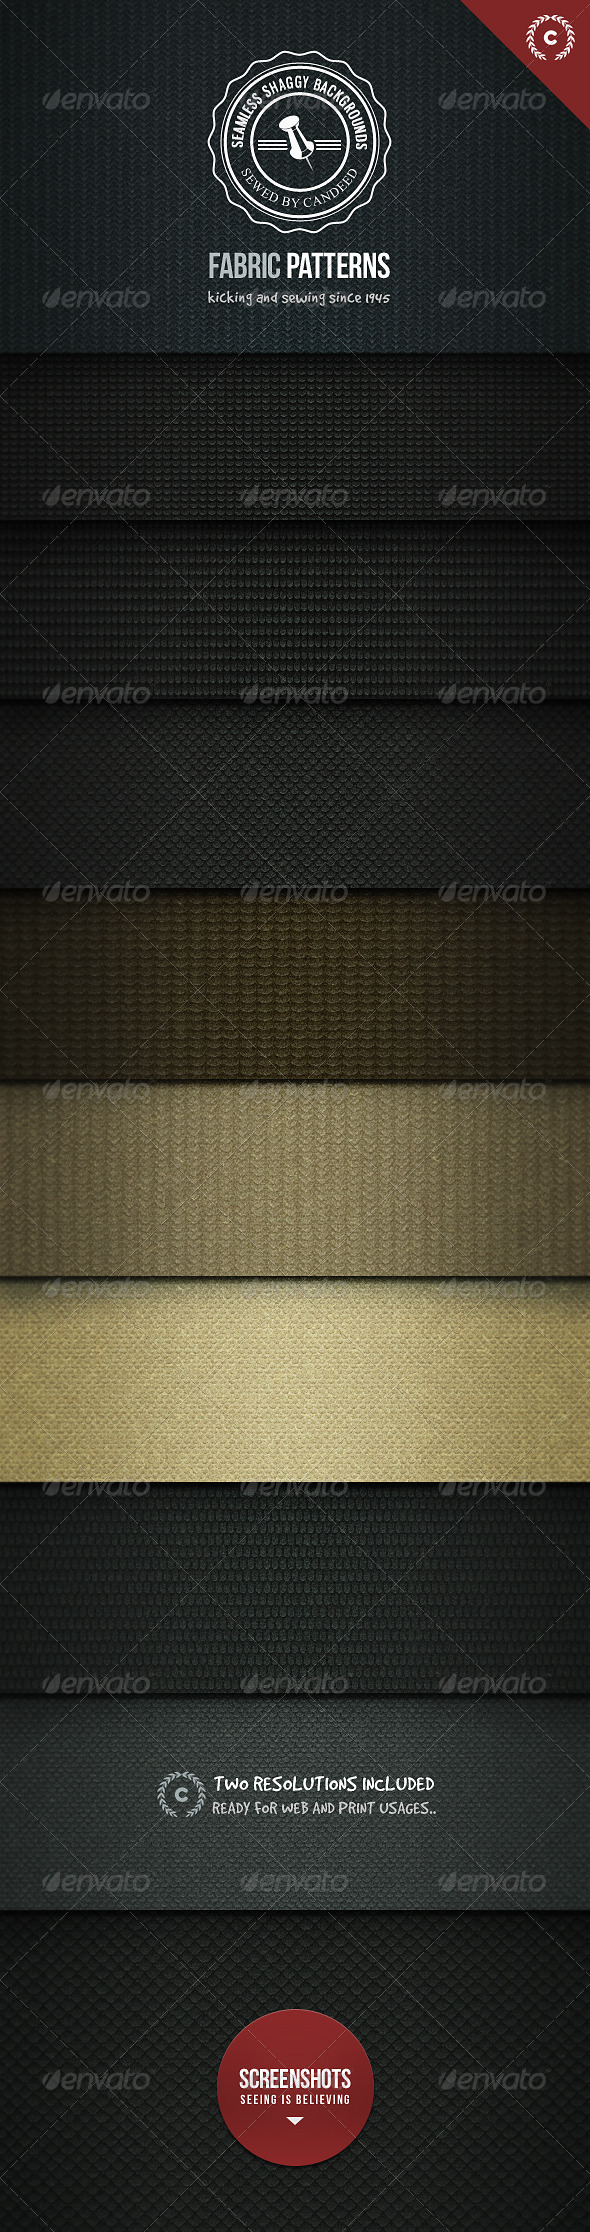 Seamless Shaggy! Fabric Texture Background